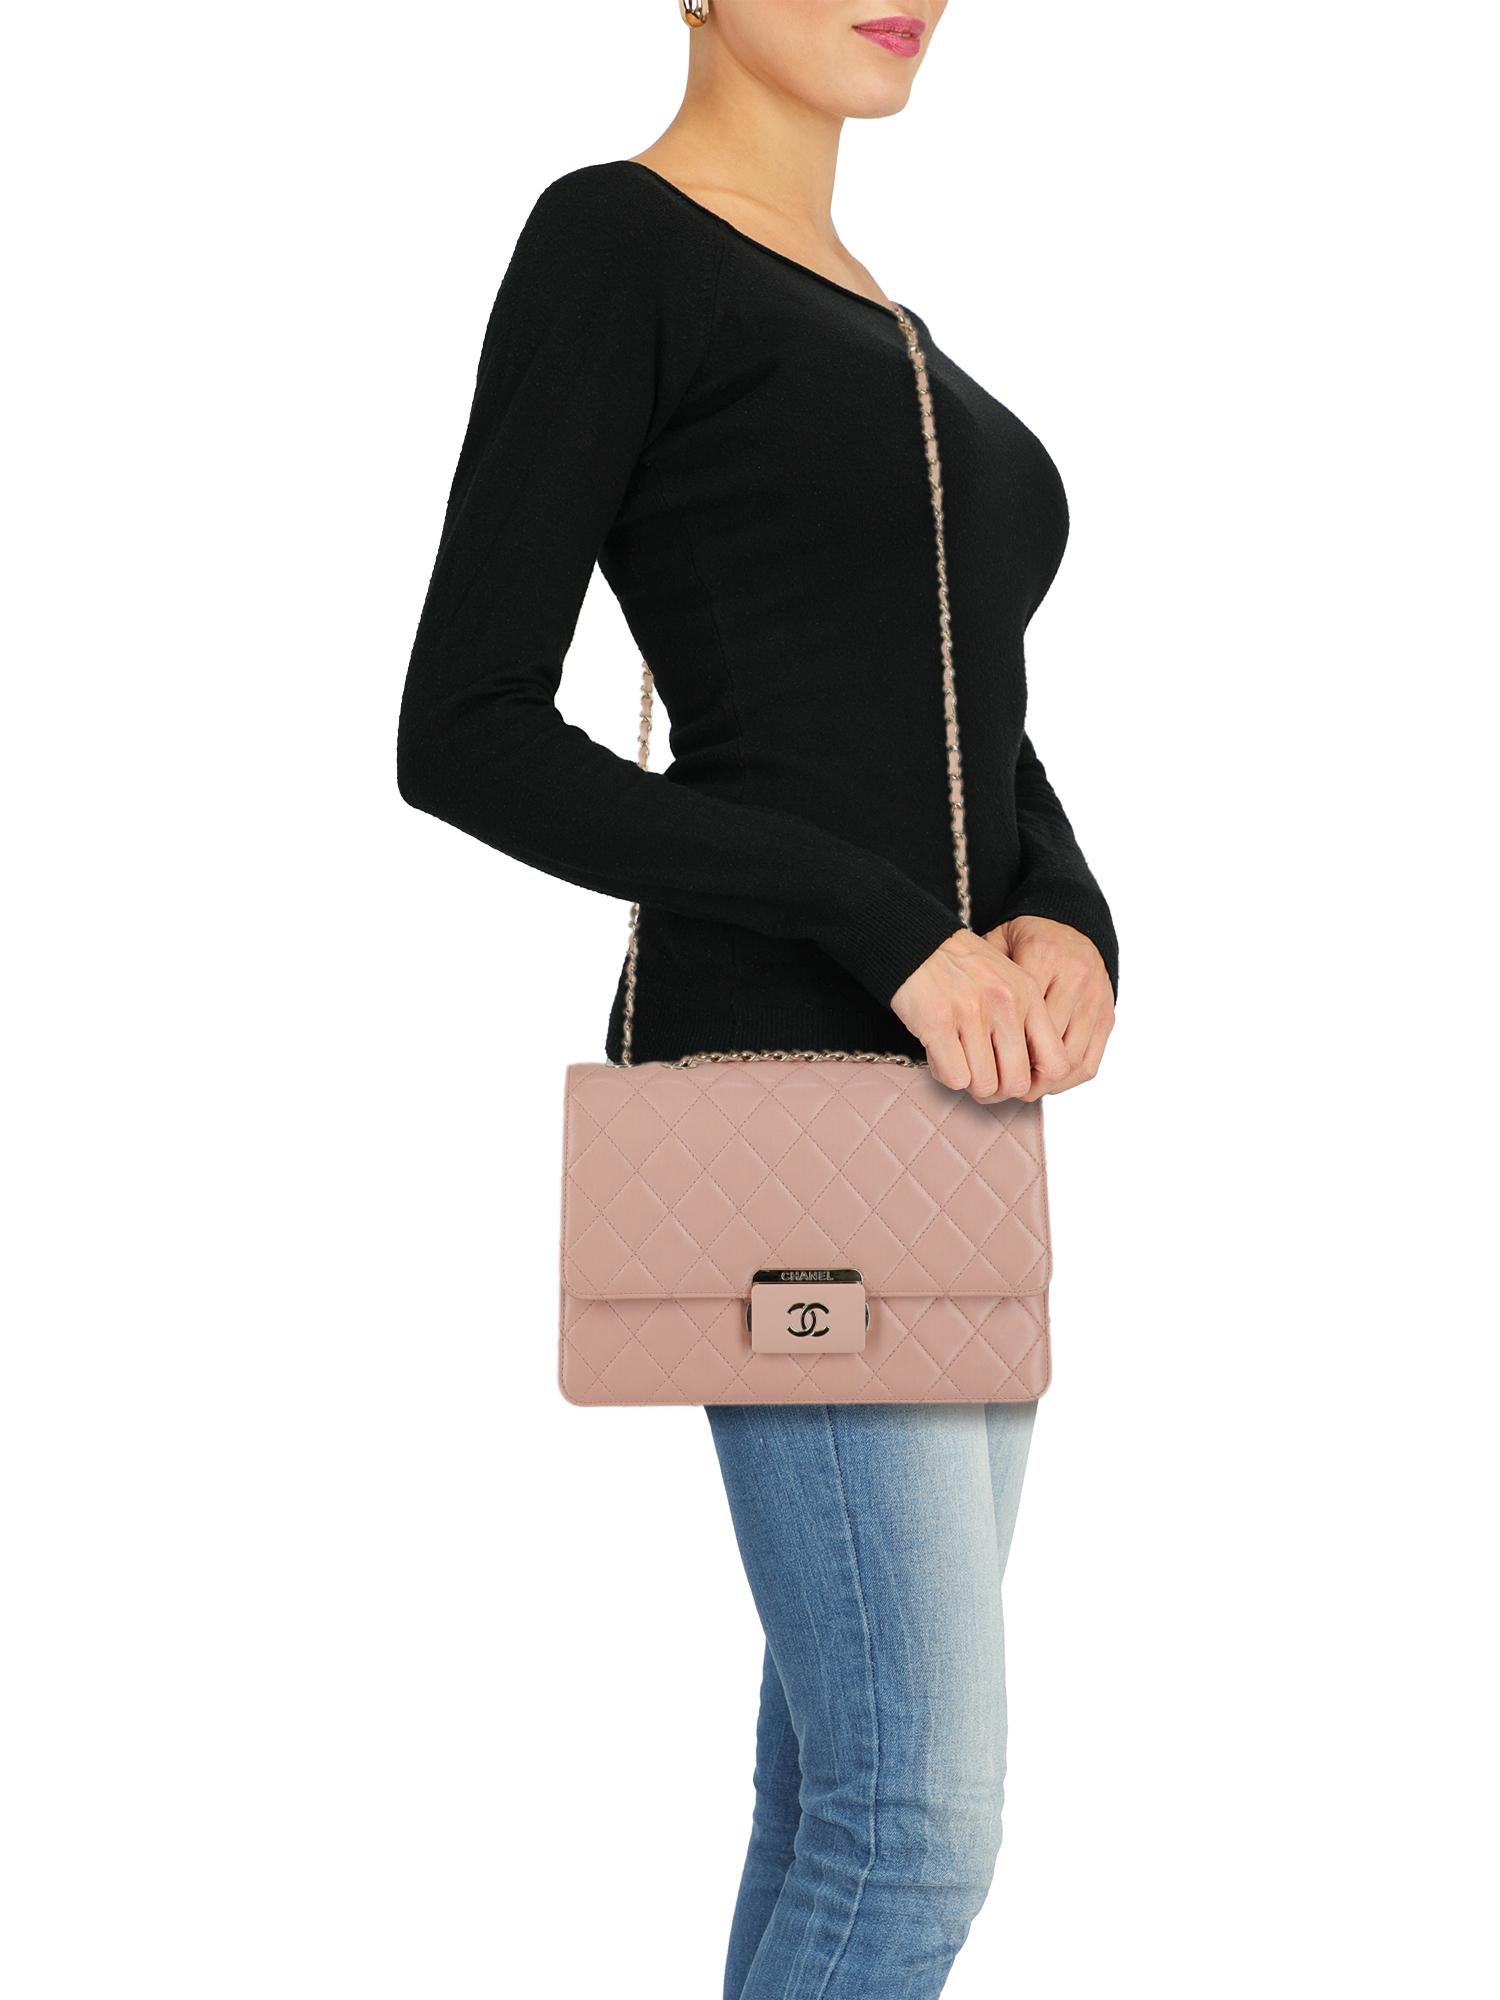 Shoulder bag, classic chain, leather, solid color, front logo, quilted, pressure lock closure, gold-tone hardware, internal zipped pocket, multiple internal compartments, leather lining, evening, occasion wear, day bag. Product Condition: Very Good.